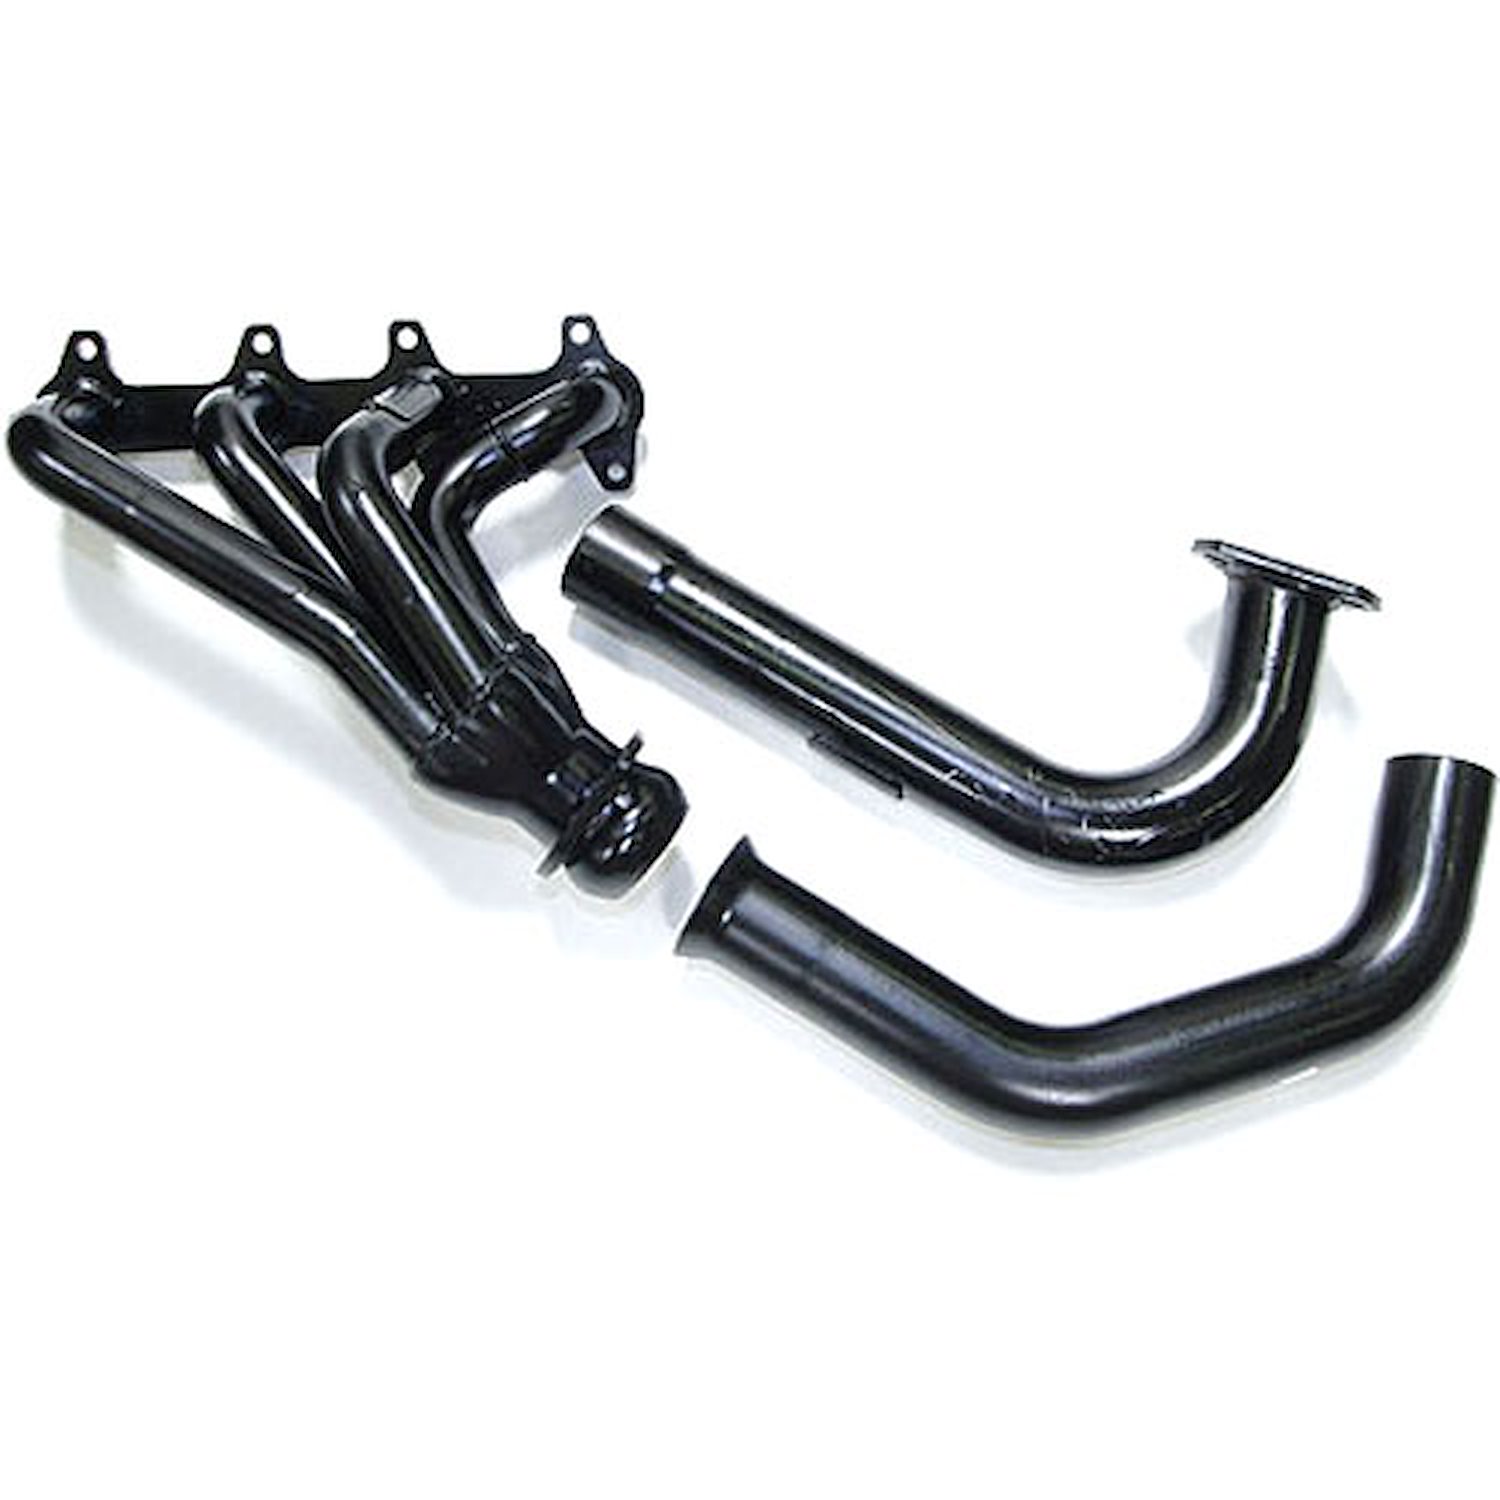 Painted Truck Headers 1996-2000 Chevy/GMC S10/S15 2WD 2.2L